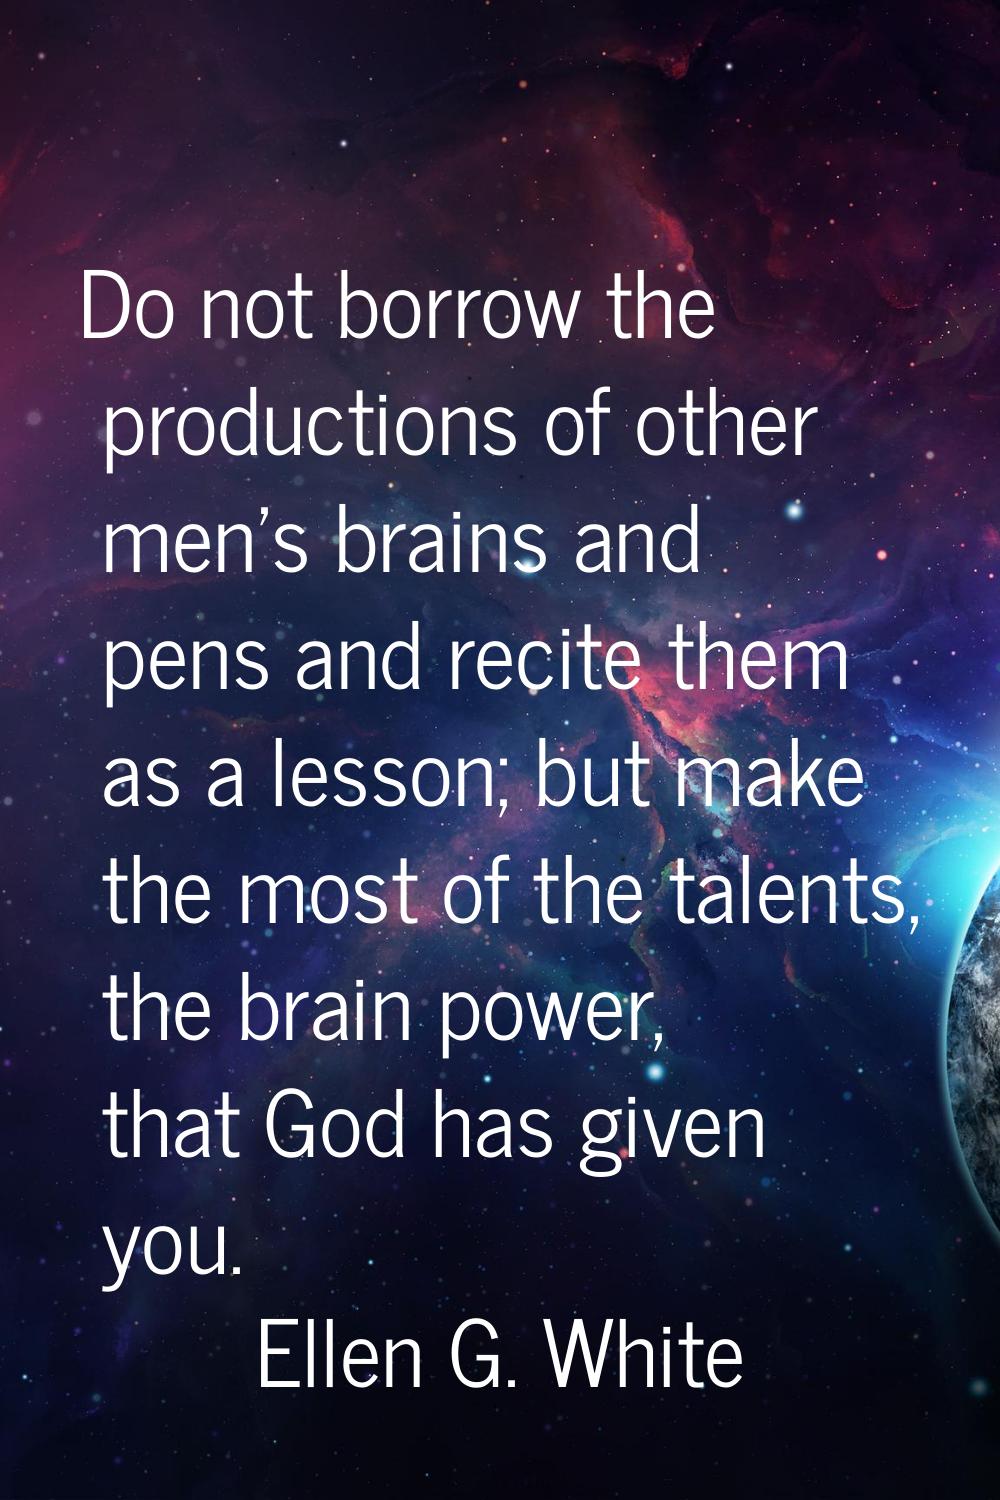 Do not borrow the productions of other men's brains and pens and recite them as a lesson; but make 